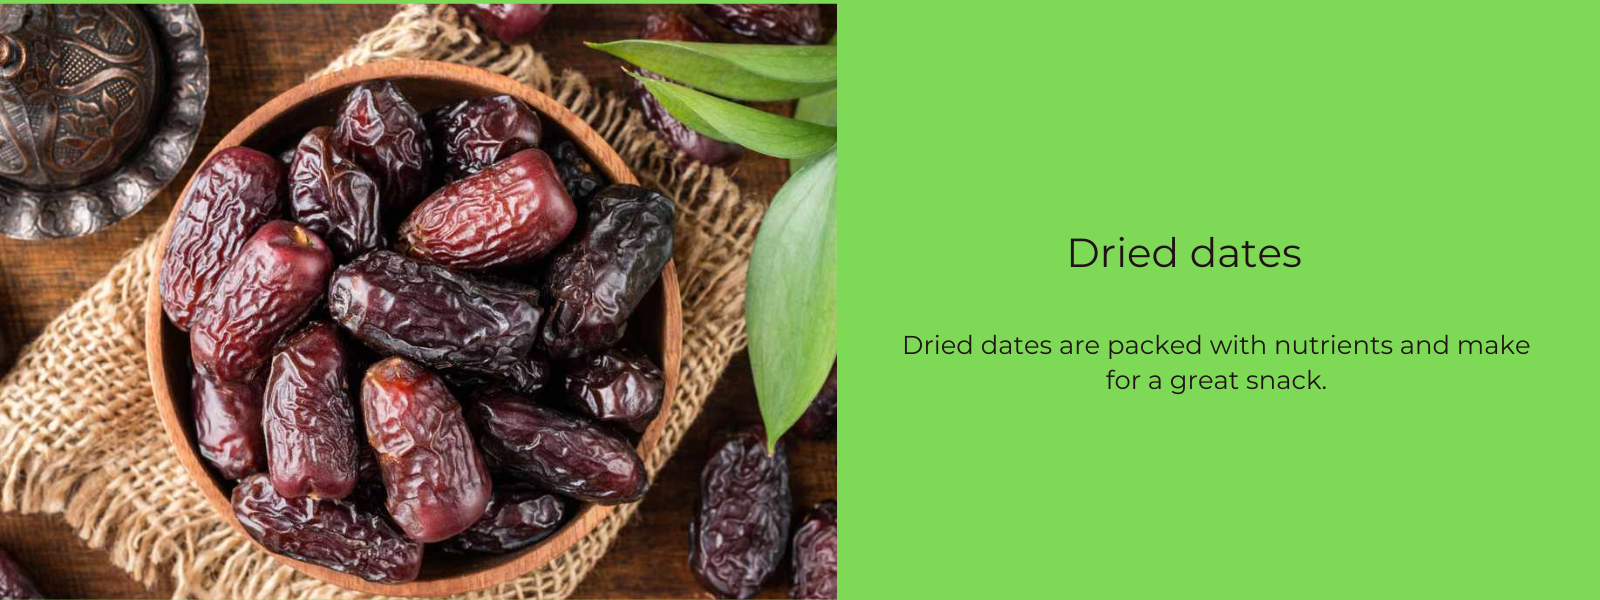 Dried dates – Health Benefits, Uses and Important Facts